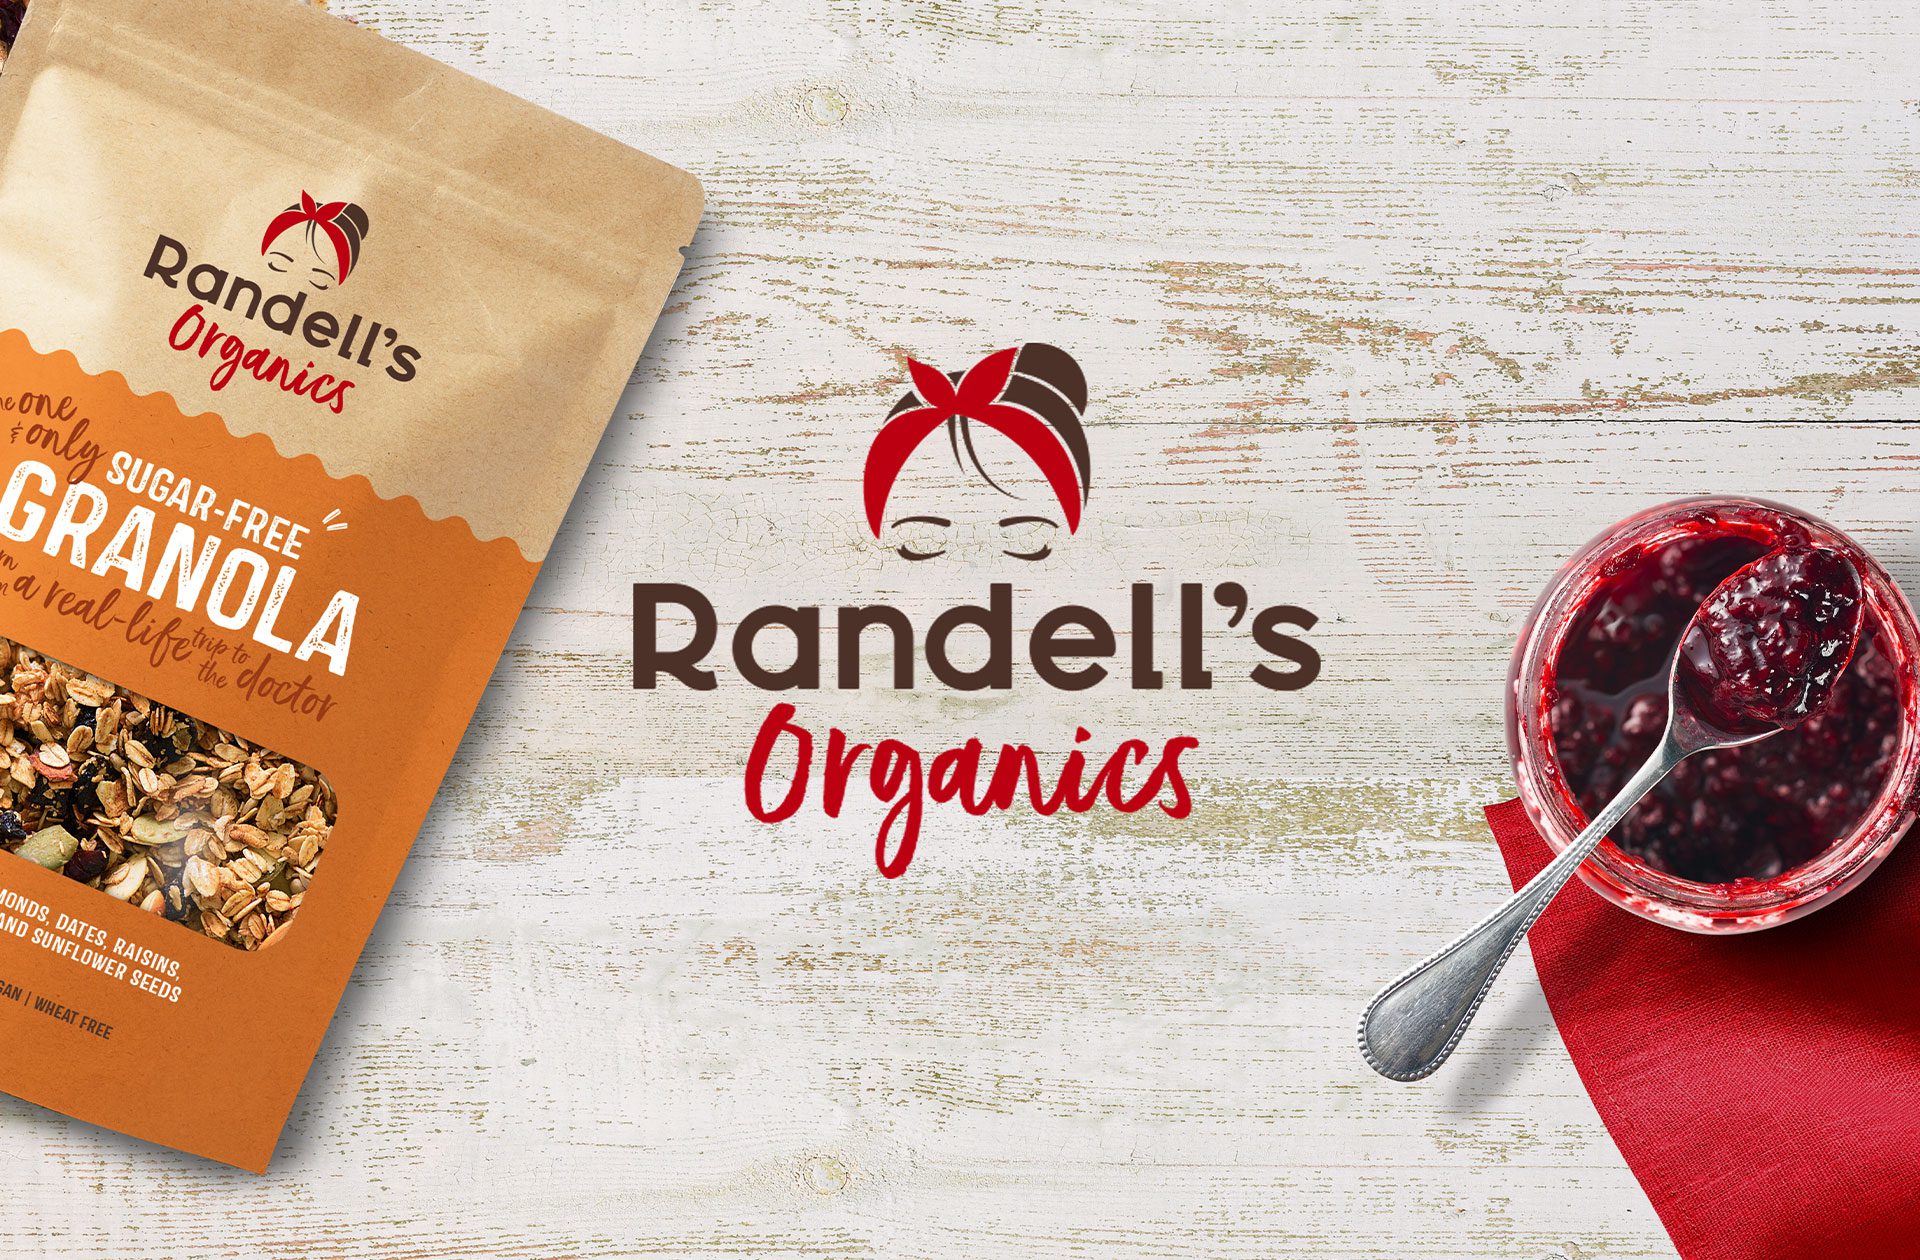 Render of promotional imagery for startup business Randell’s Organics, featuring packaging, a jar of jam and the brand's logo, showcasing cpg branding and logo design services.